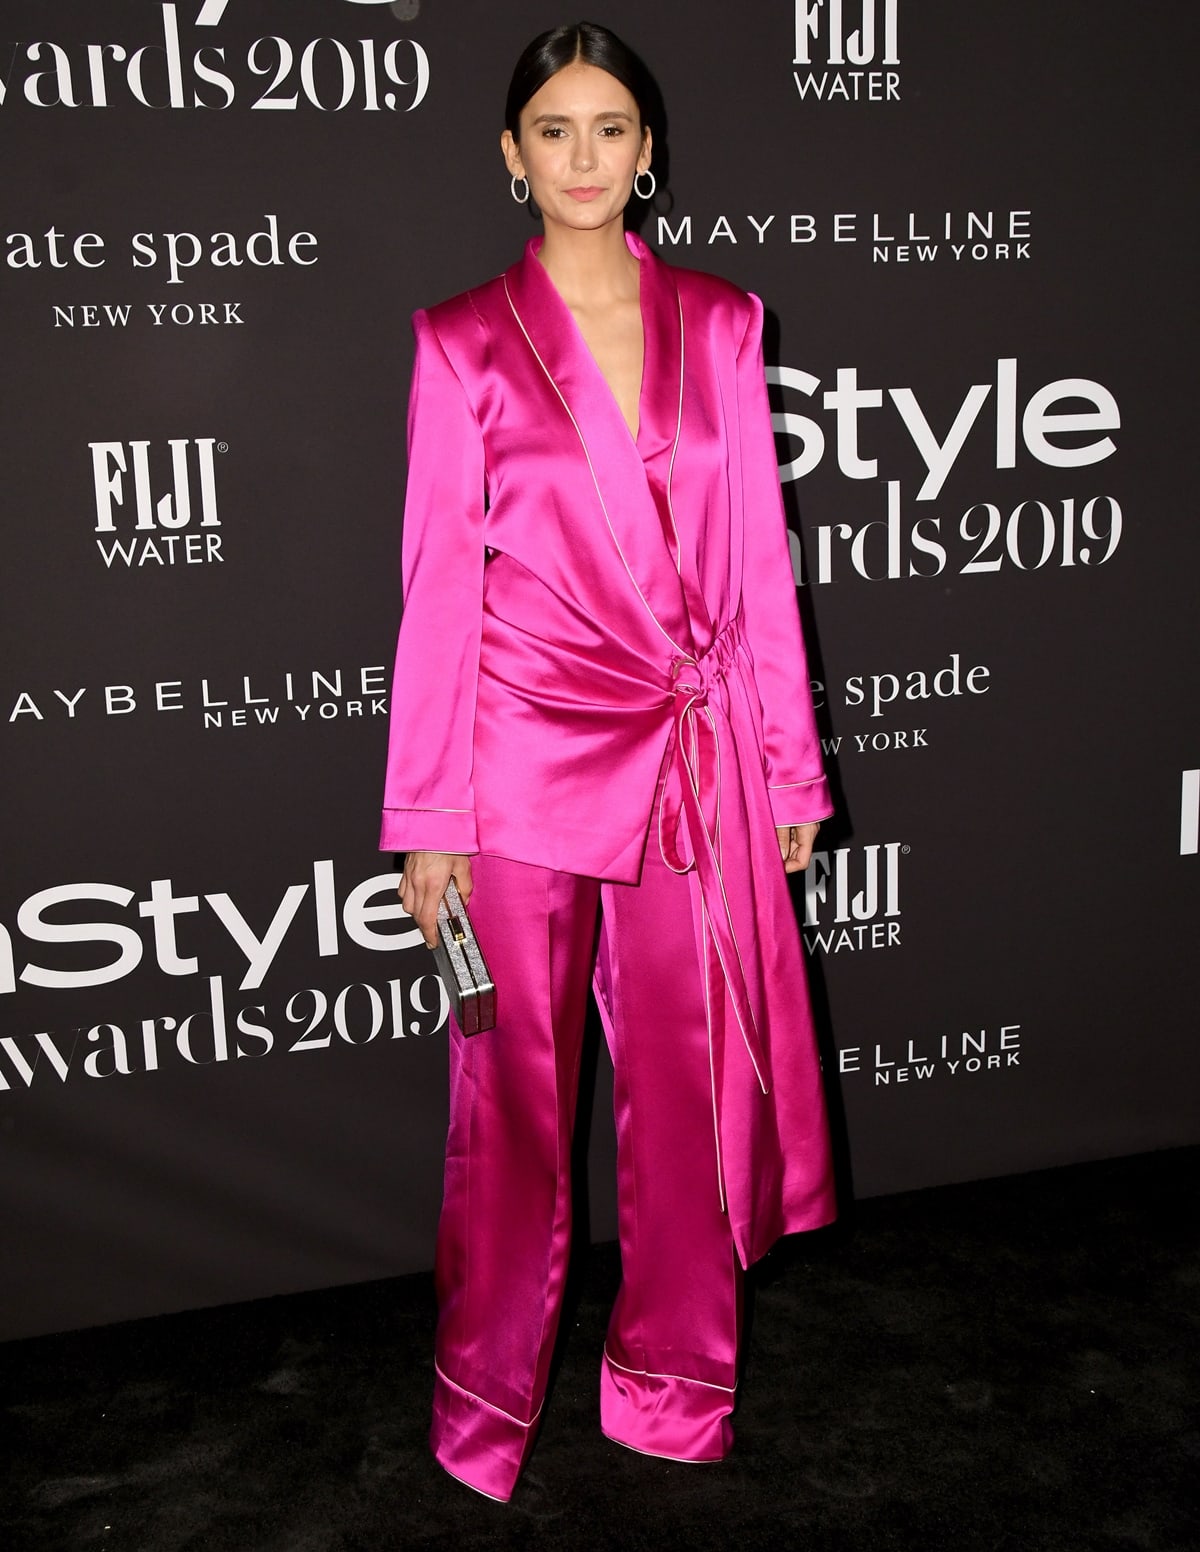 Nina Dobrev looked stunning in a pink Cong Tri Spring 2020 suit at the 2019 InStyle Awards